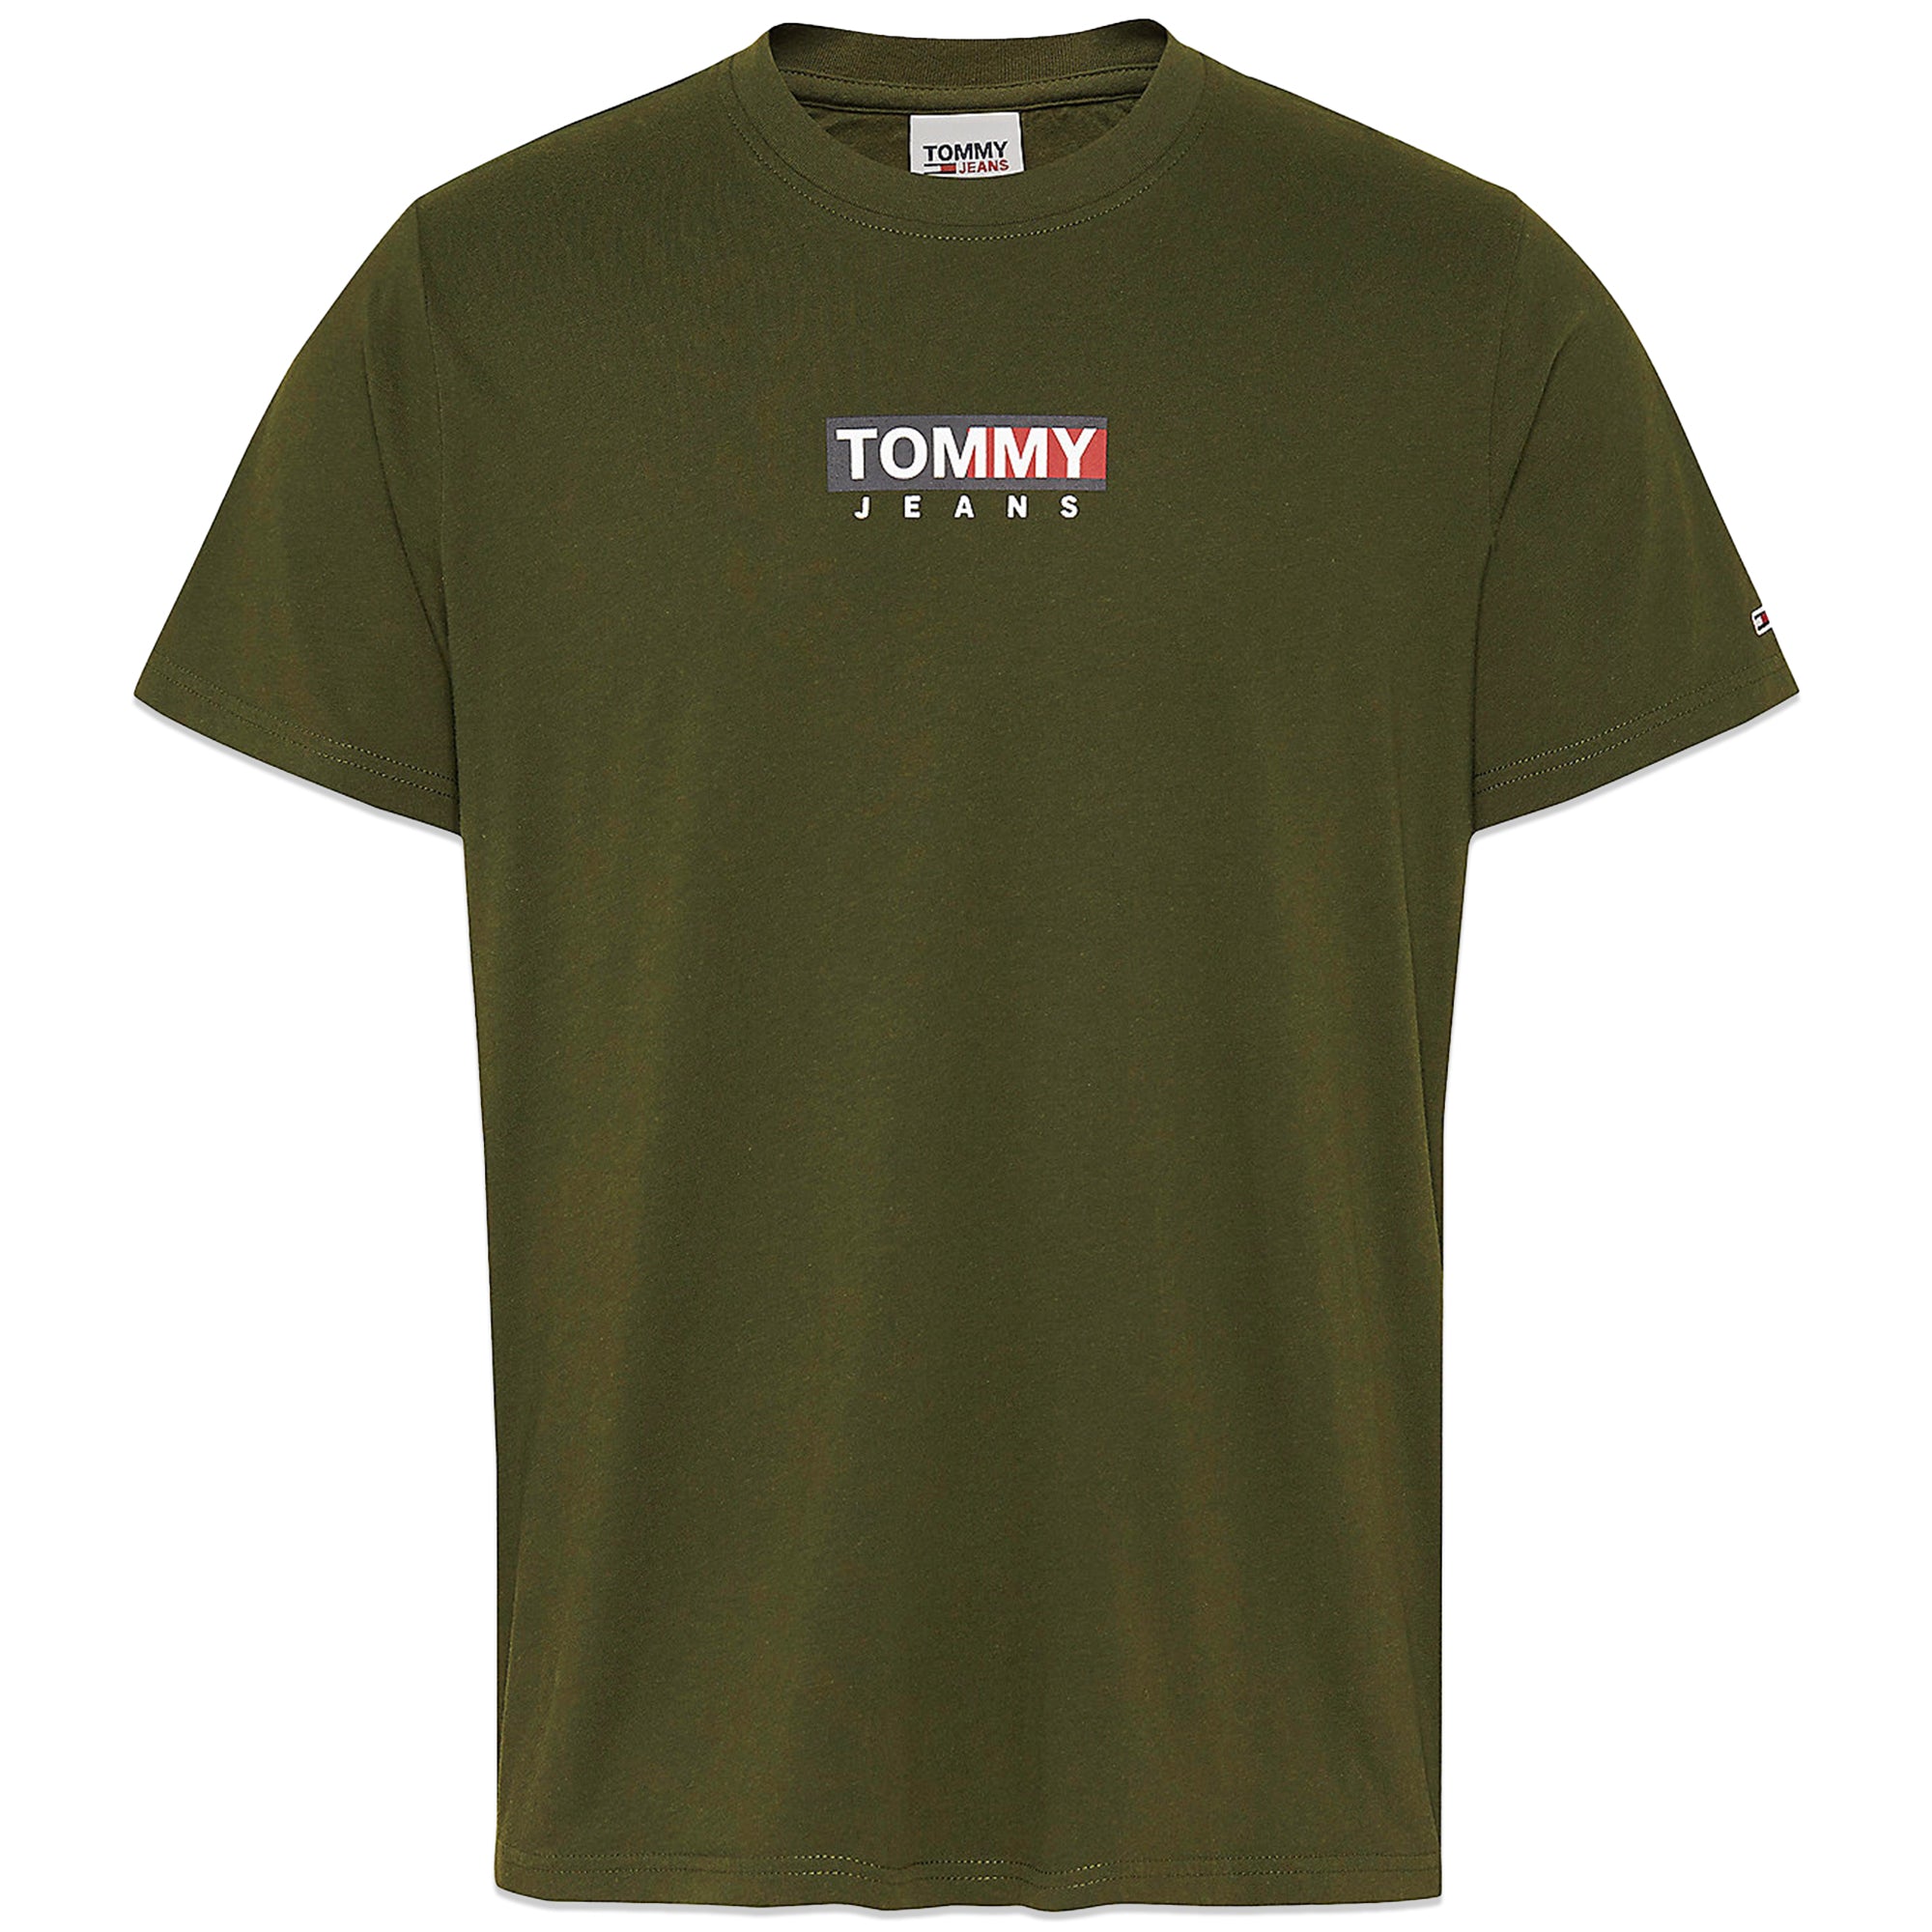 Embroidery Sand - Signature Savannah Tommy T-Shirt